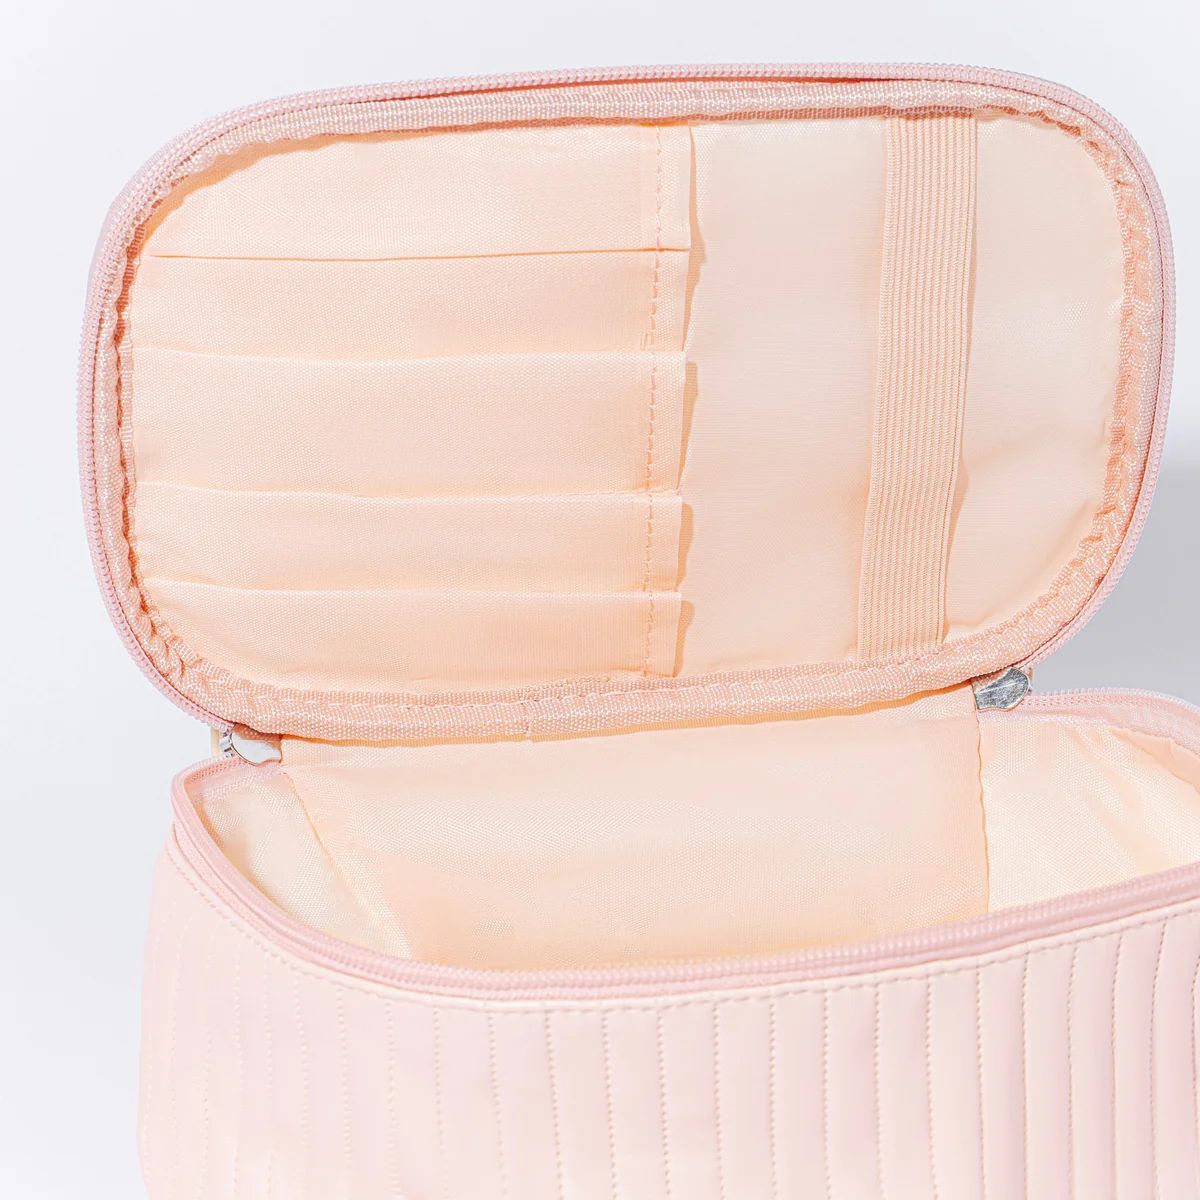 Beauty Creations - New Pink Cosmetic Bag Big 12 Unidades